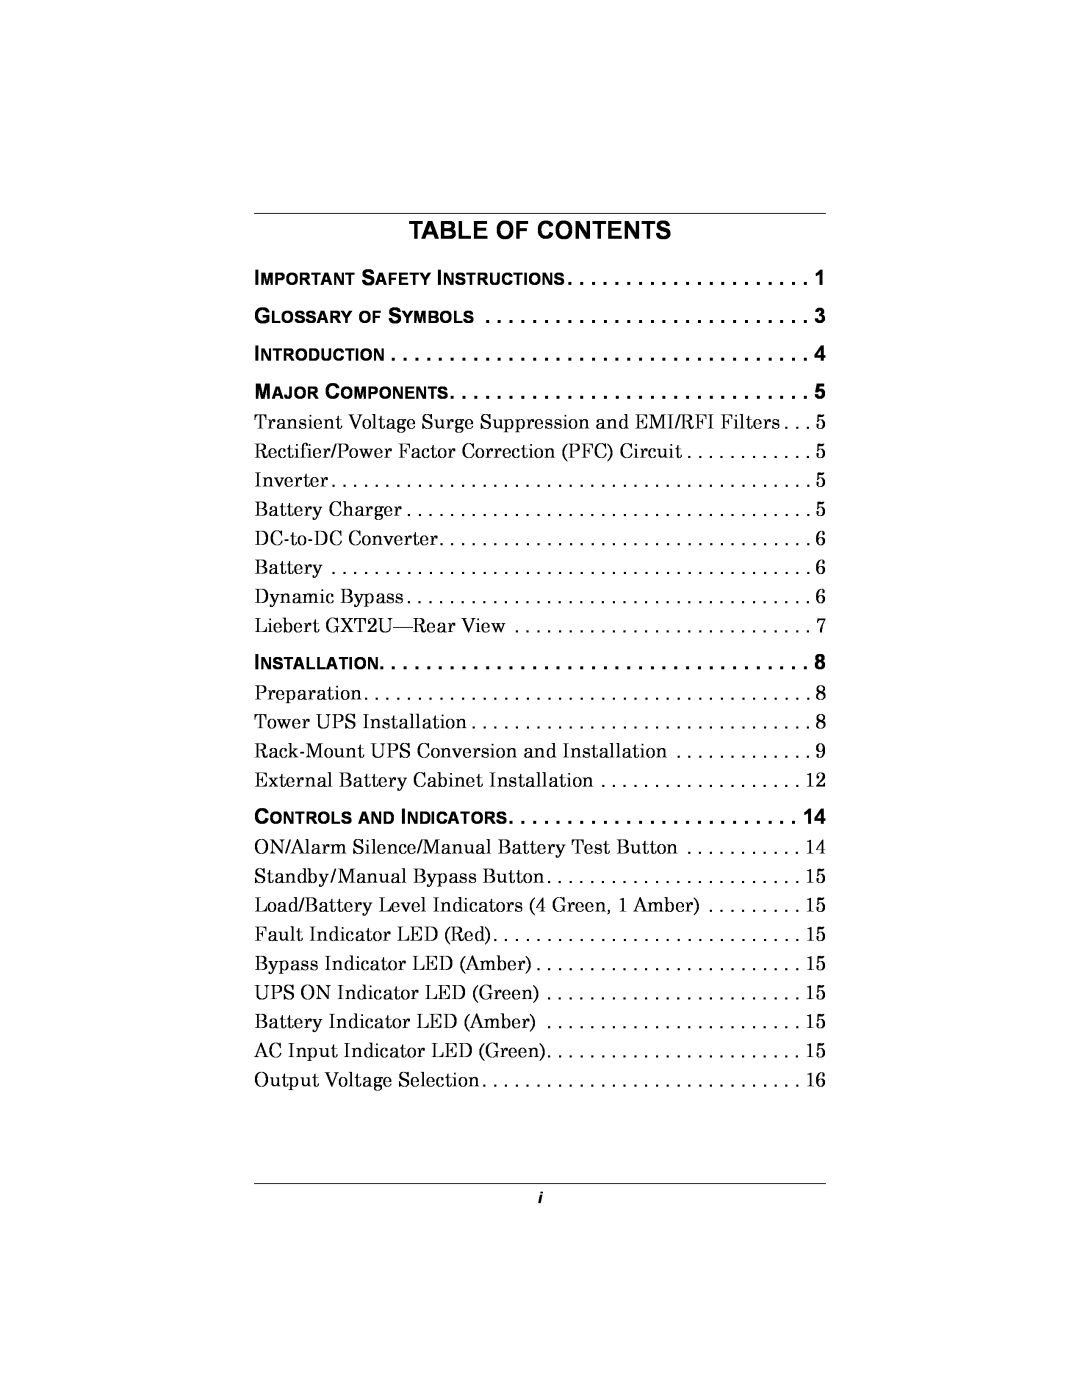 Emerson GXT2U Table Of Contents, Important Safety Instructions Glossary Of Symbols Introduction, Major Components 